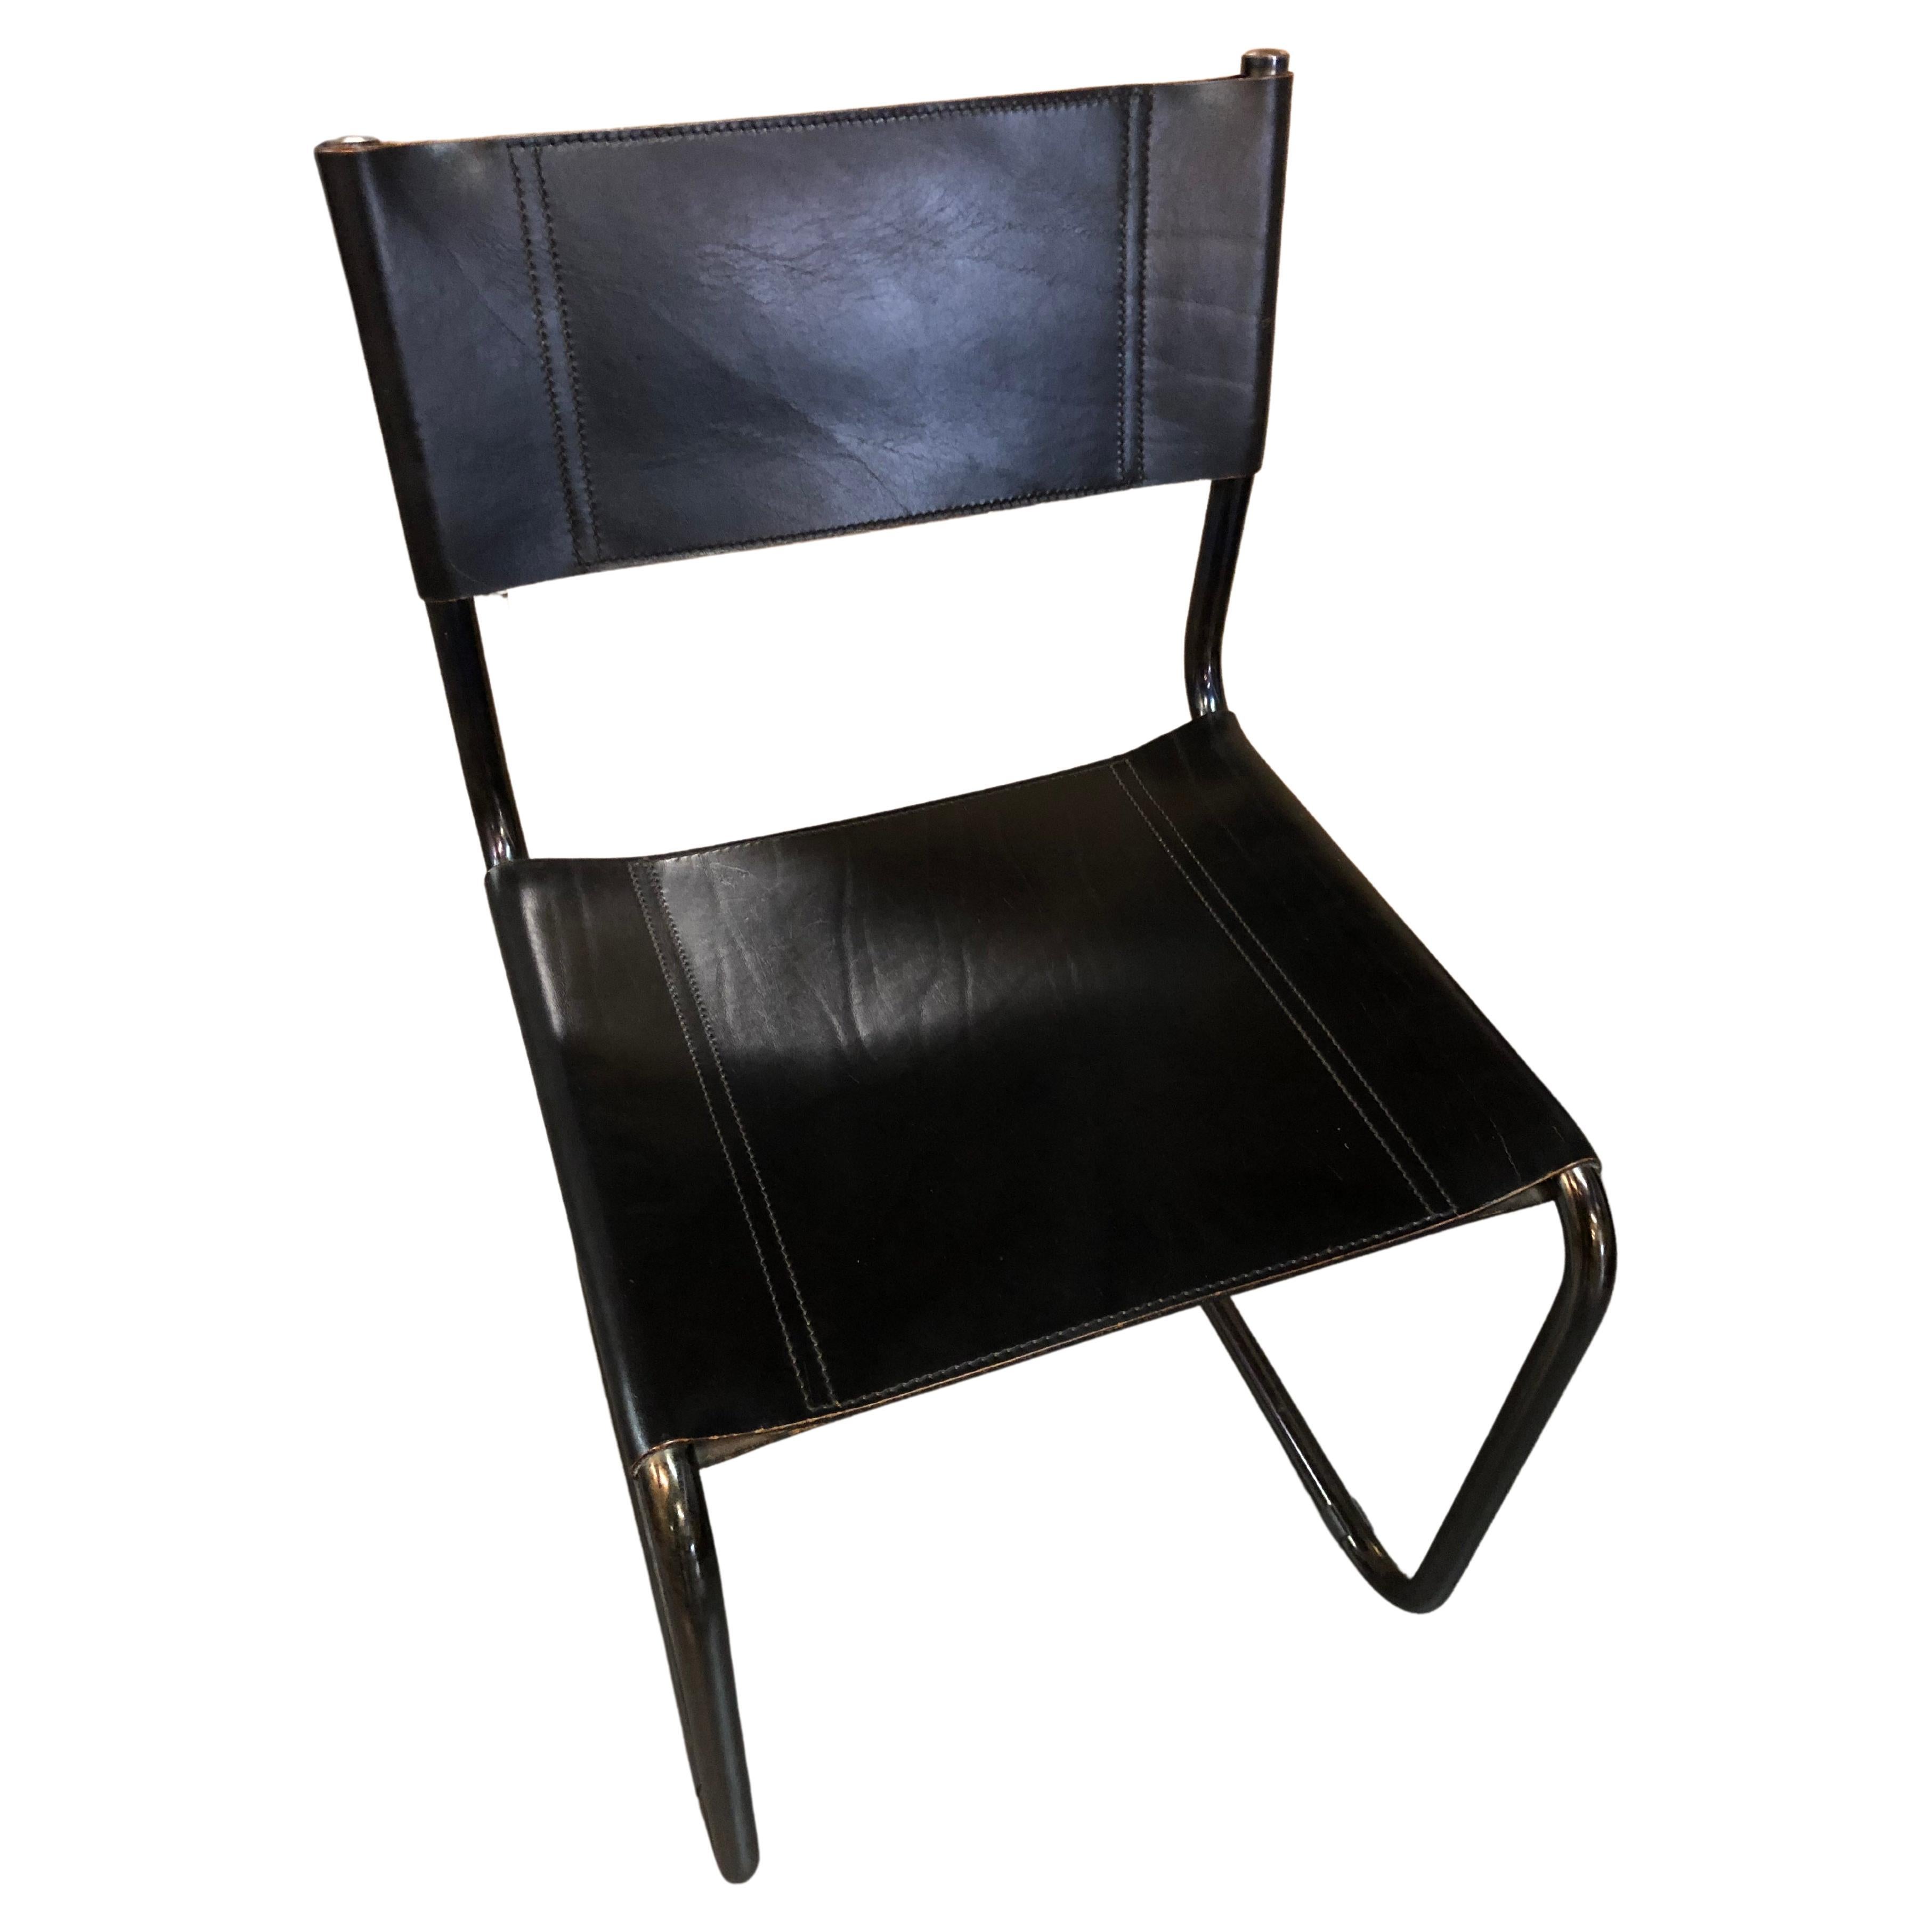 Cantilever Chair Matteo Grassi - 16 For Sale on 1stDibs | matteo grassi stol,  cantilever stol